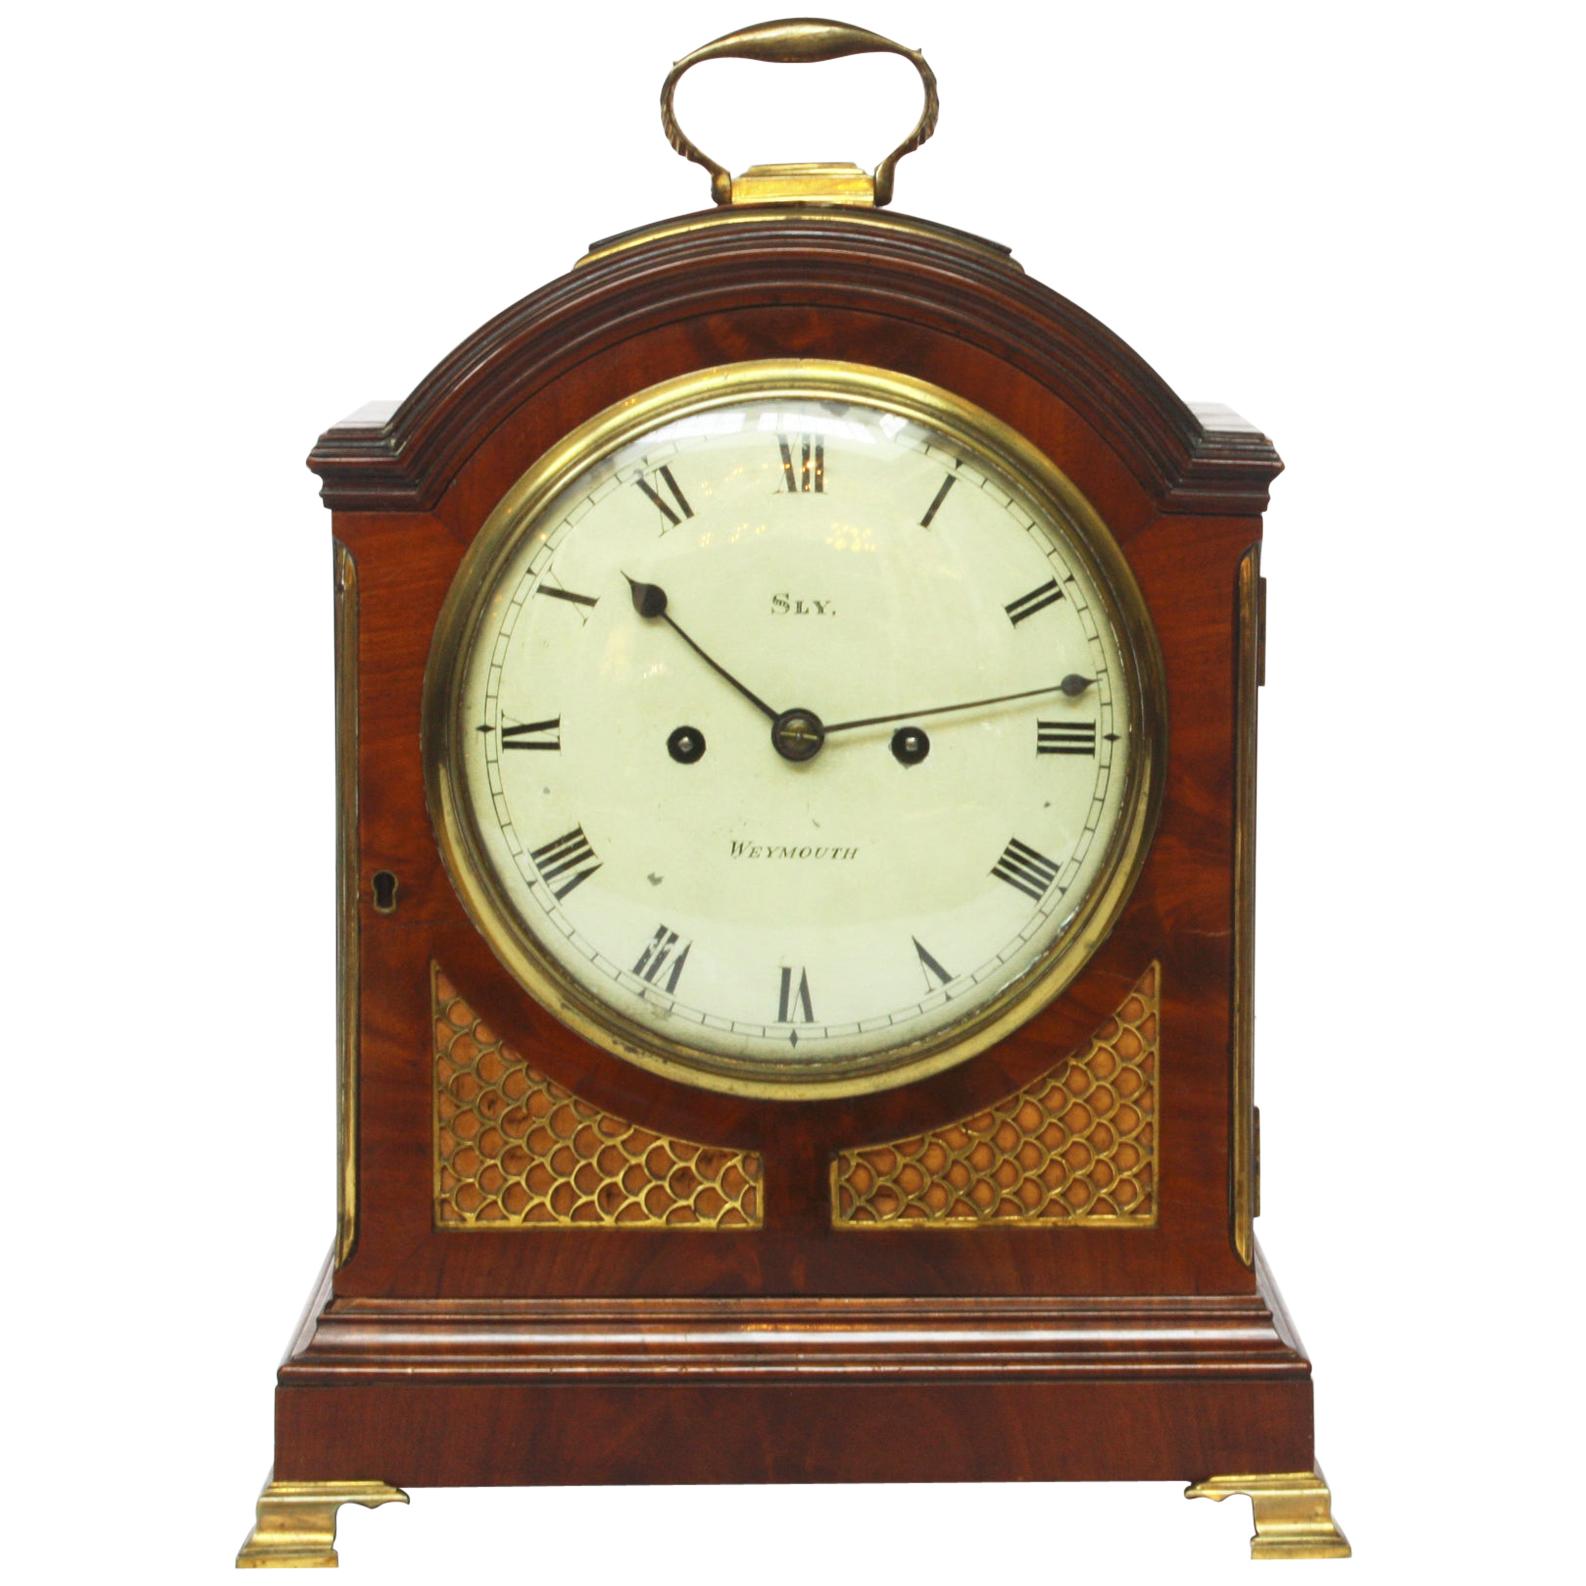 George II Mahogany Arched-Top Bracket Clock by Sly, Weymouth, England For Sale